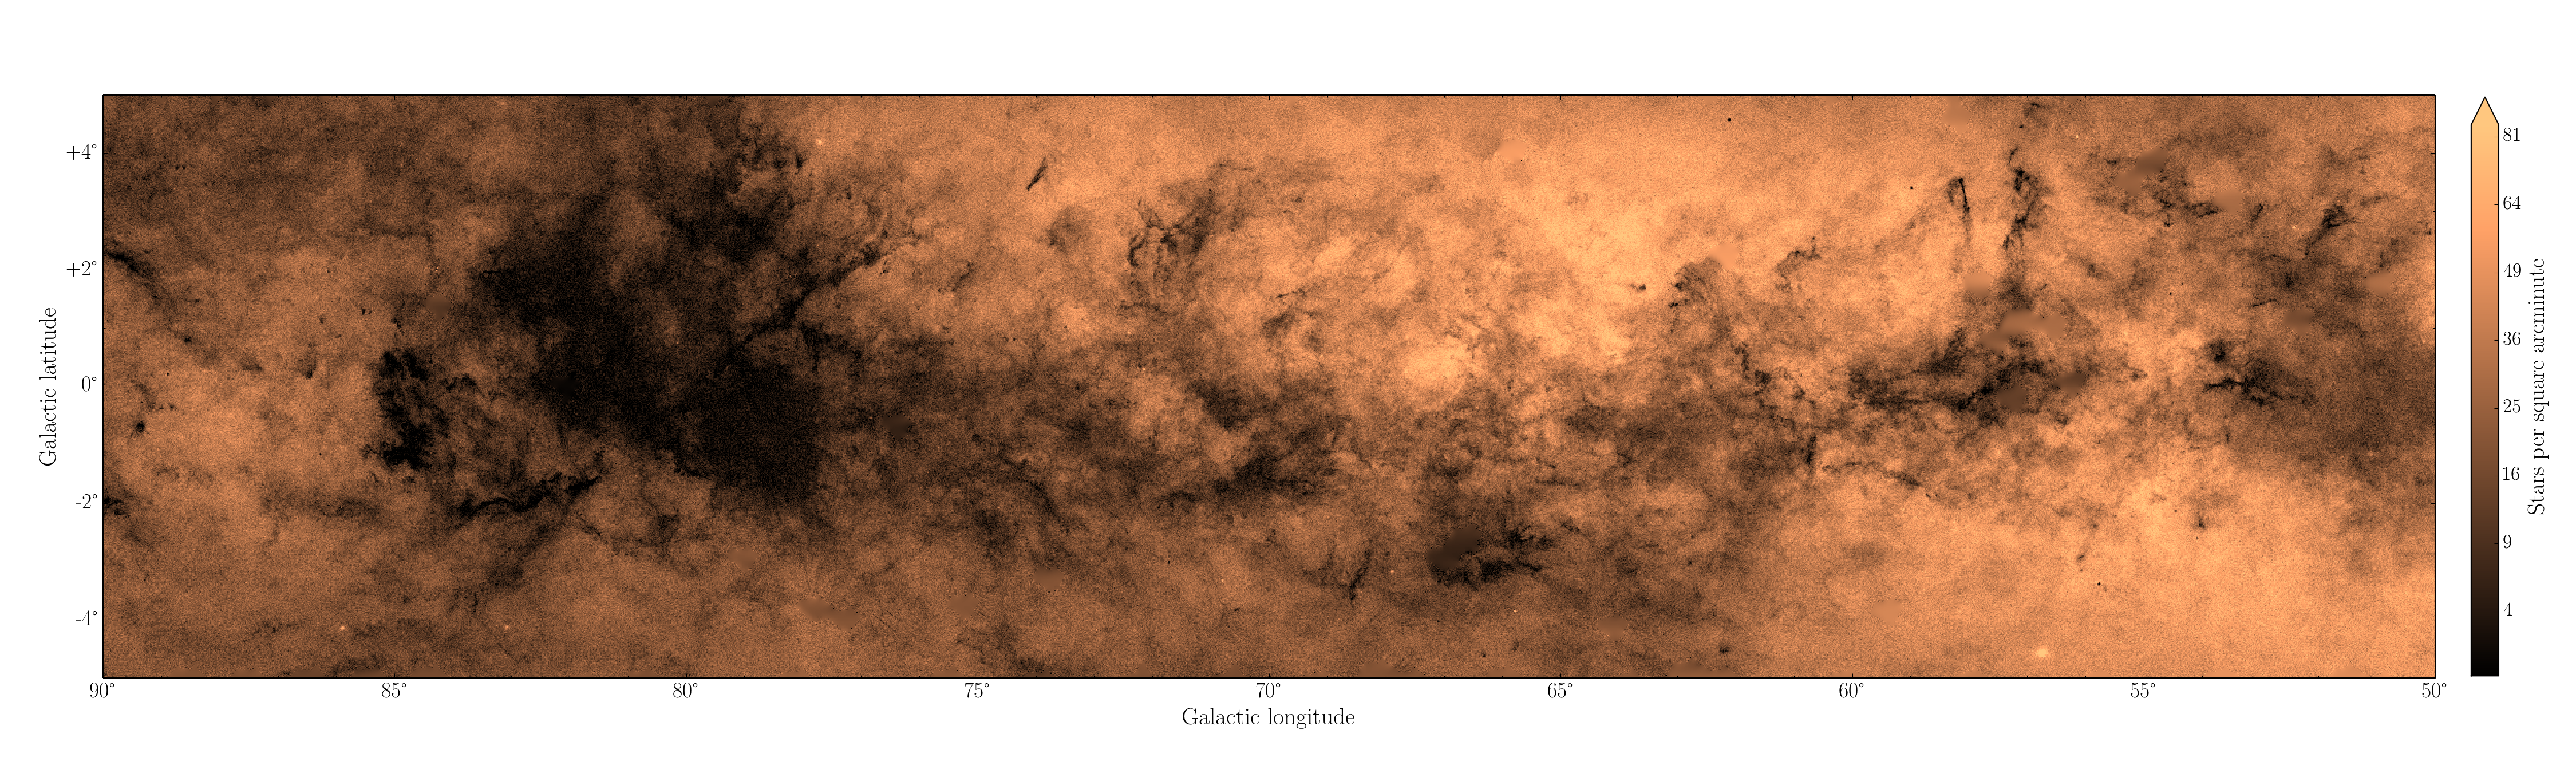 artistic representation showing the density of the galaxy